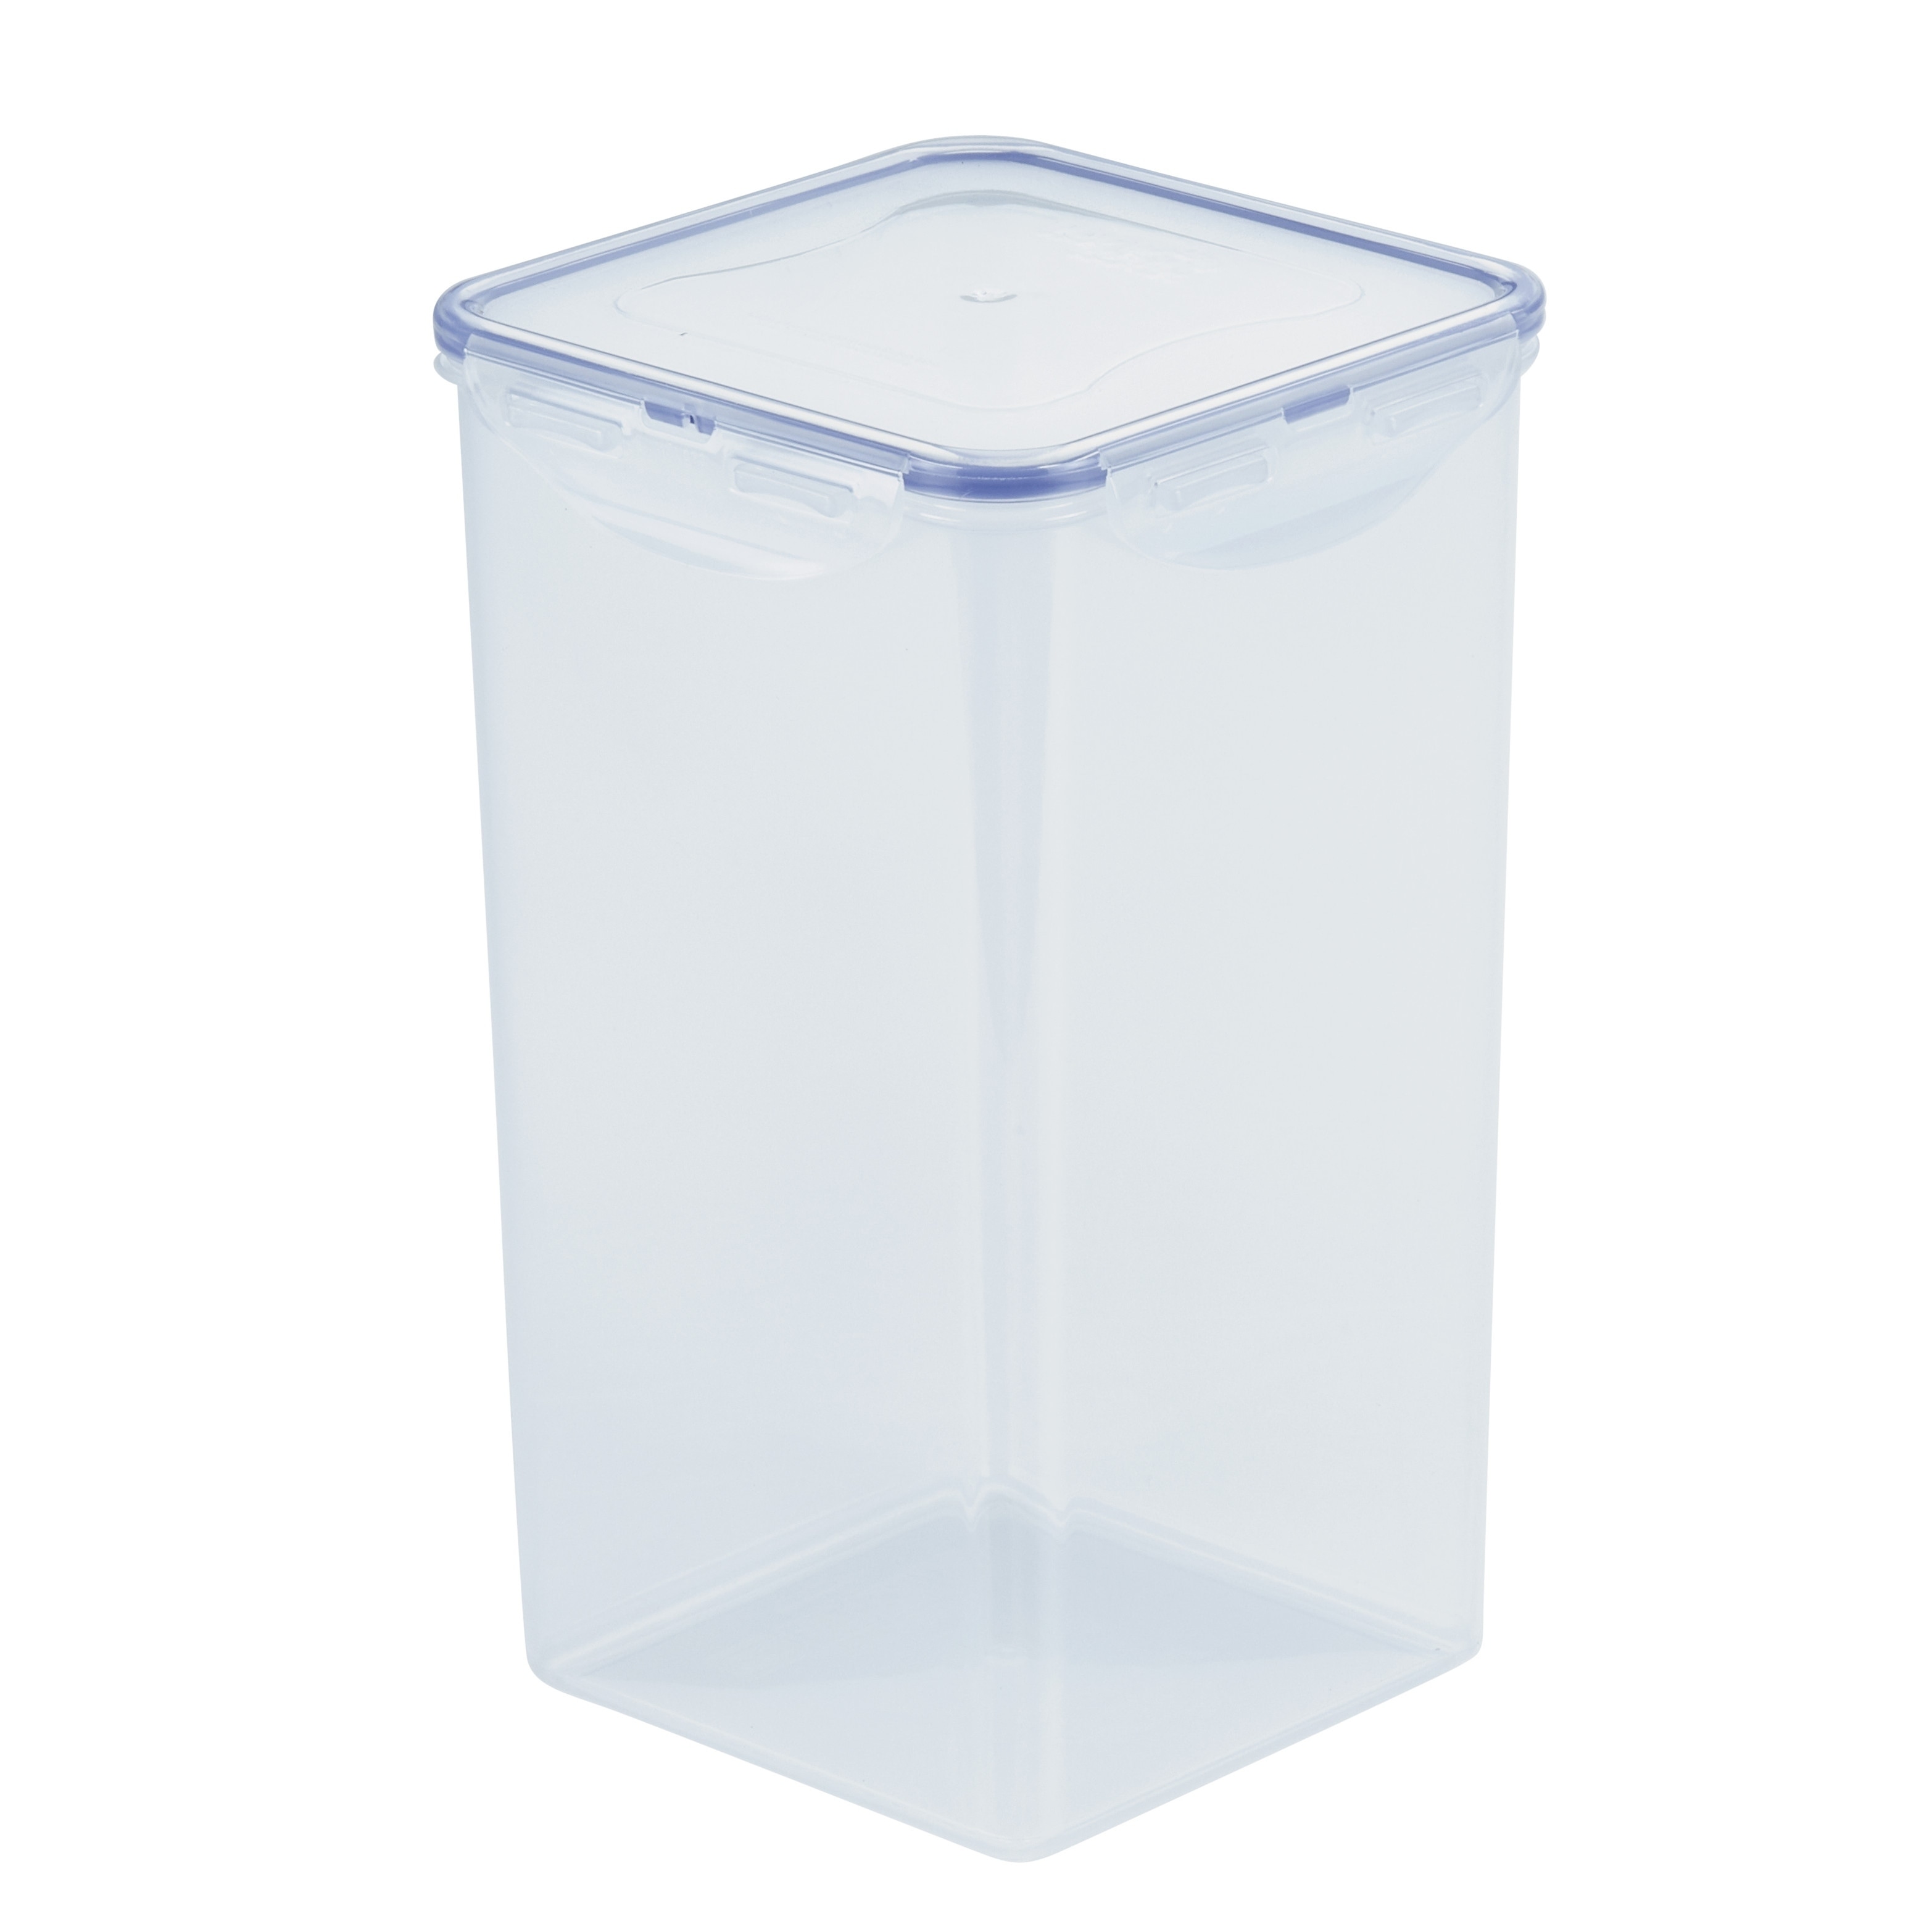 Easy Essentials Pantry Square Food Storage Container, 16-Cup